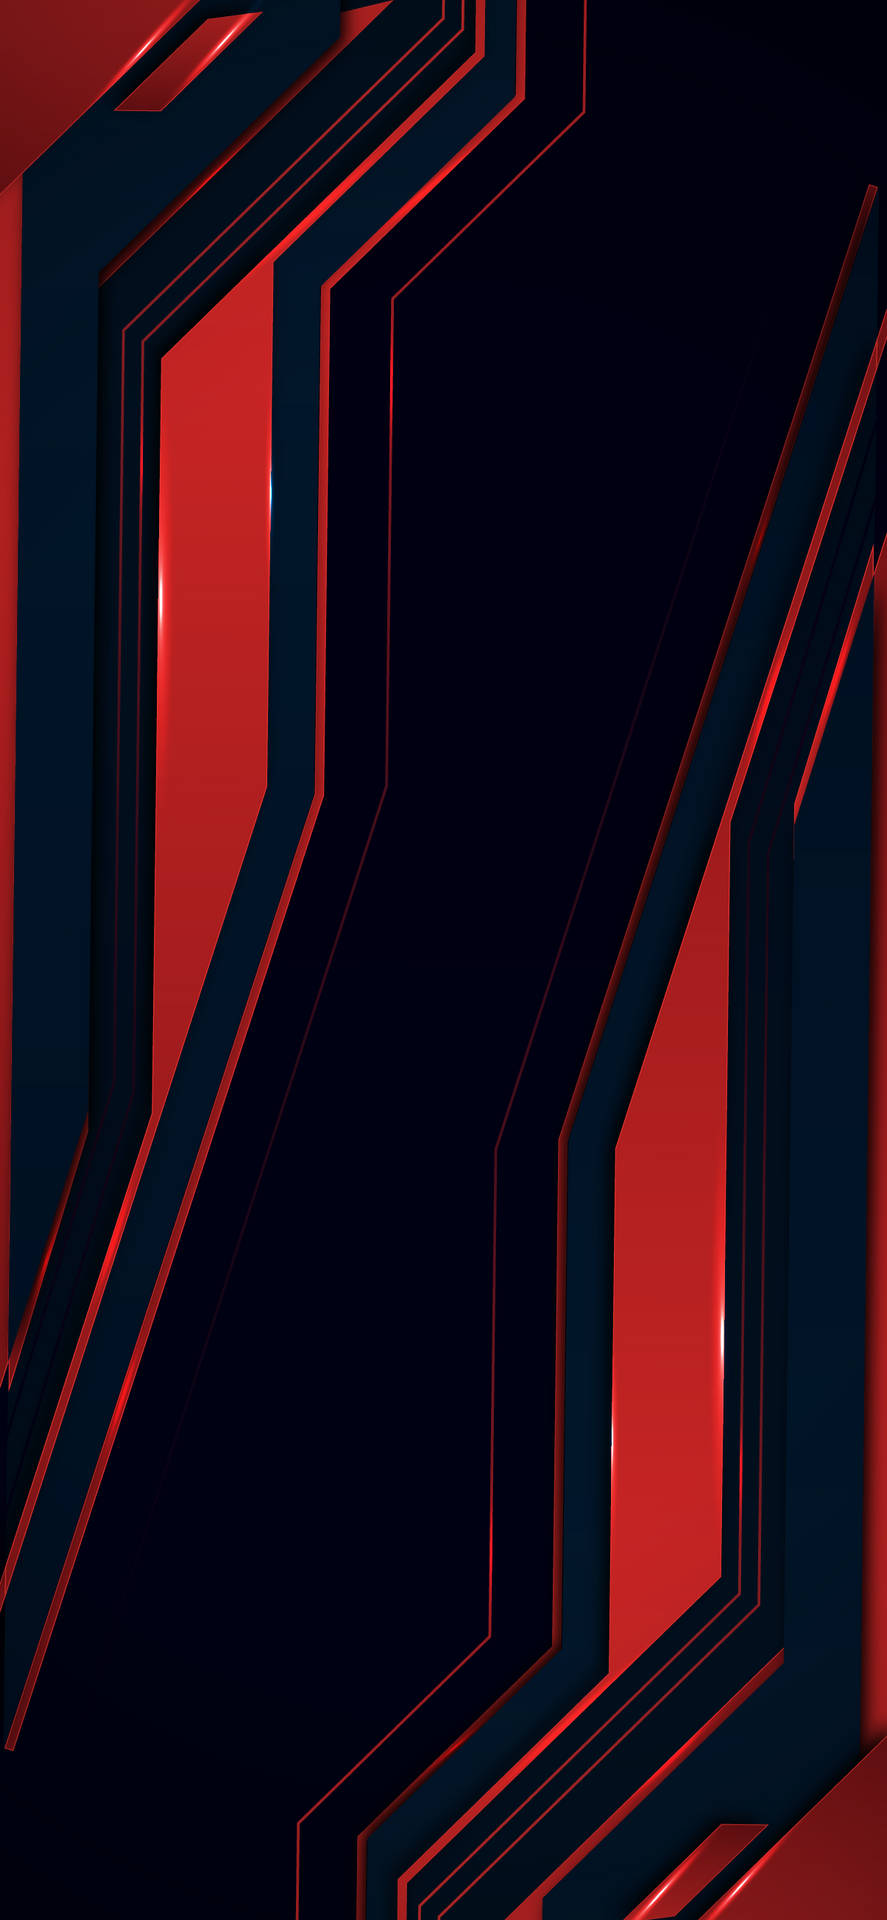 "Red and Black Iphone on Black Background" Wallpaper